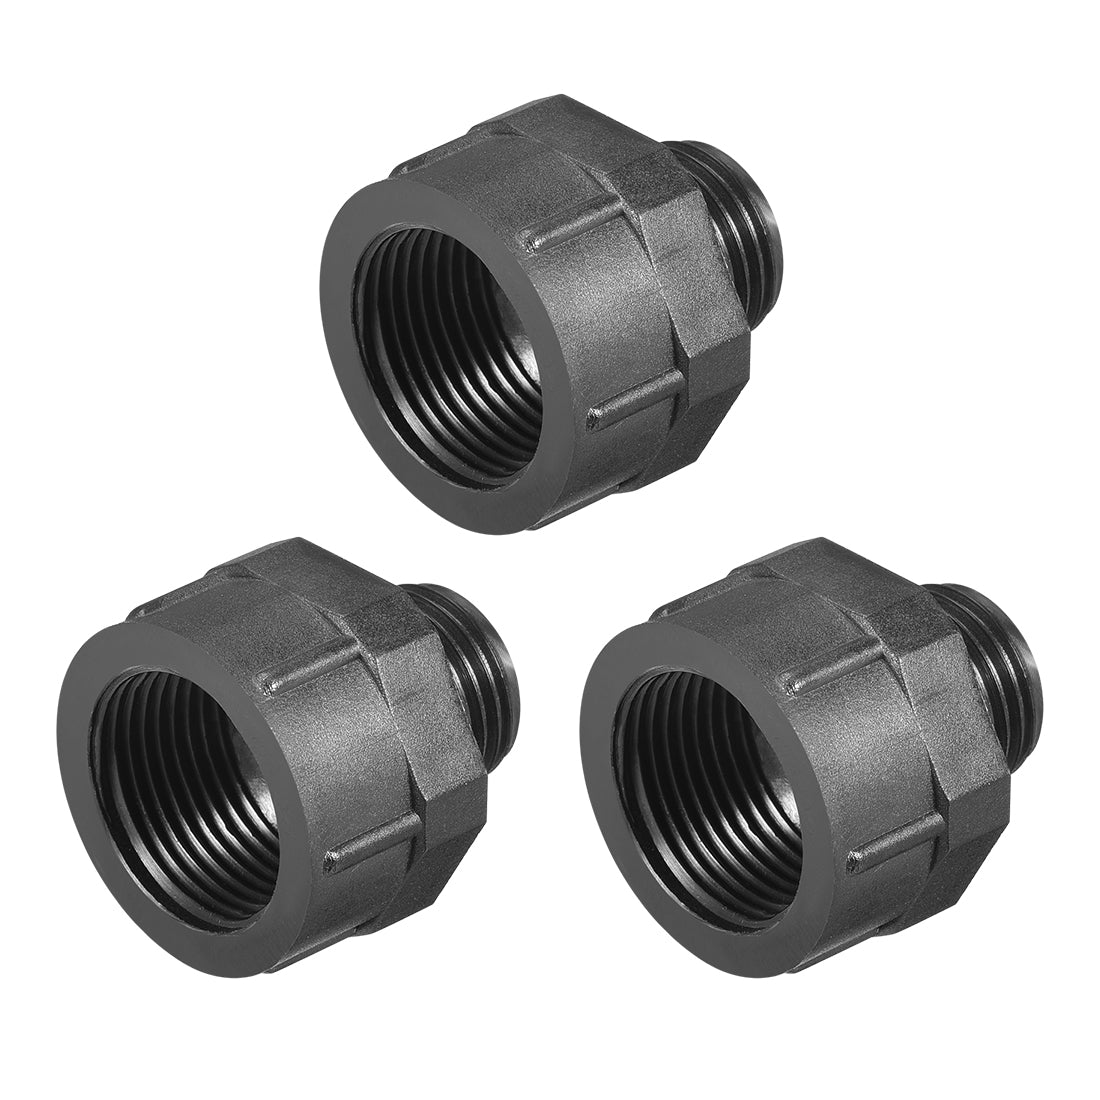 uxcell Uxcell Threaded Bushings Nylon Connector Adaptor M16 Outer Thread to M20 Inner Thread Black , 3 Pcs